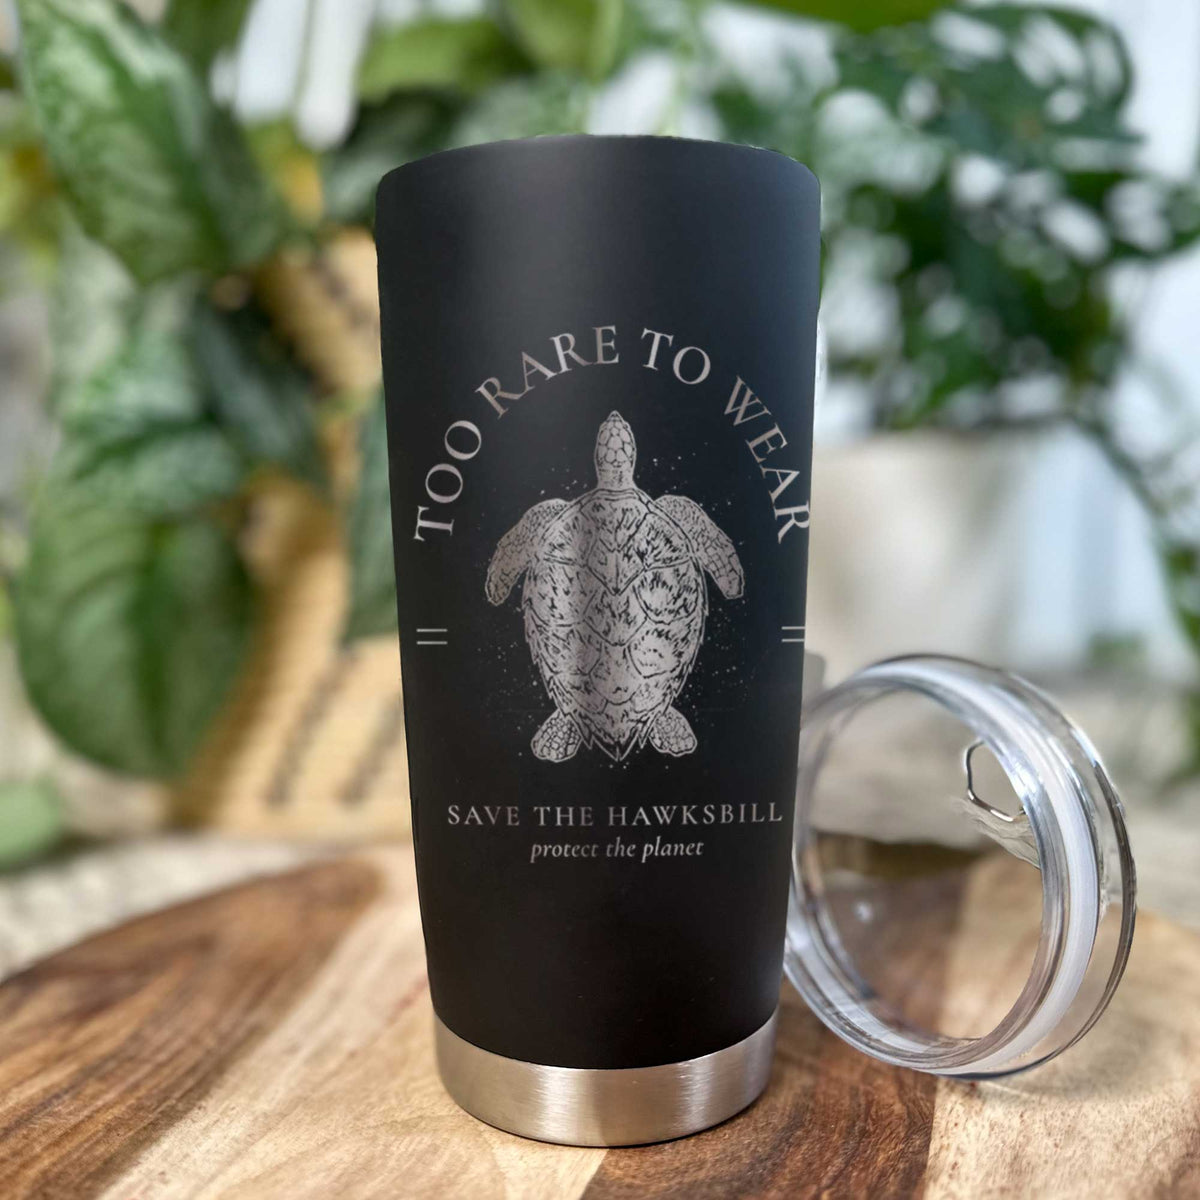 Too Rare to Wear - Save the Hawksbill - 20oz Polar Insulated Tumbler